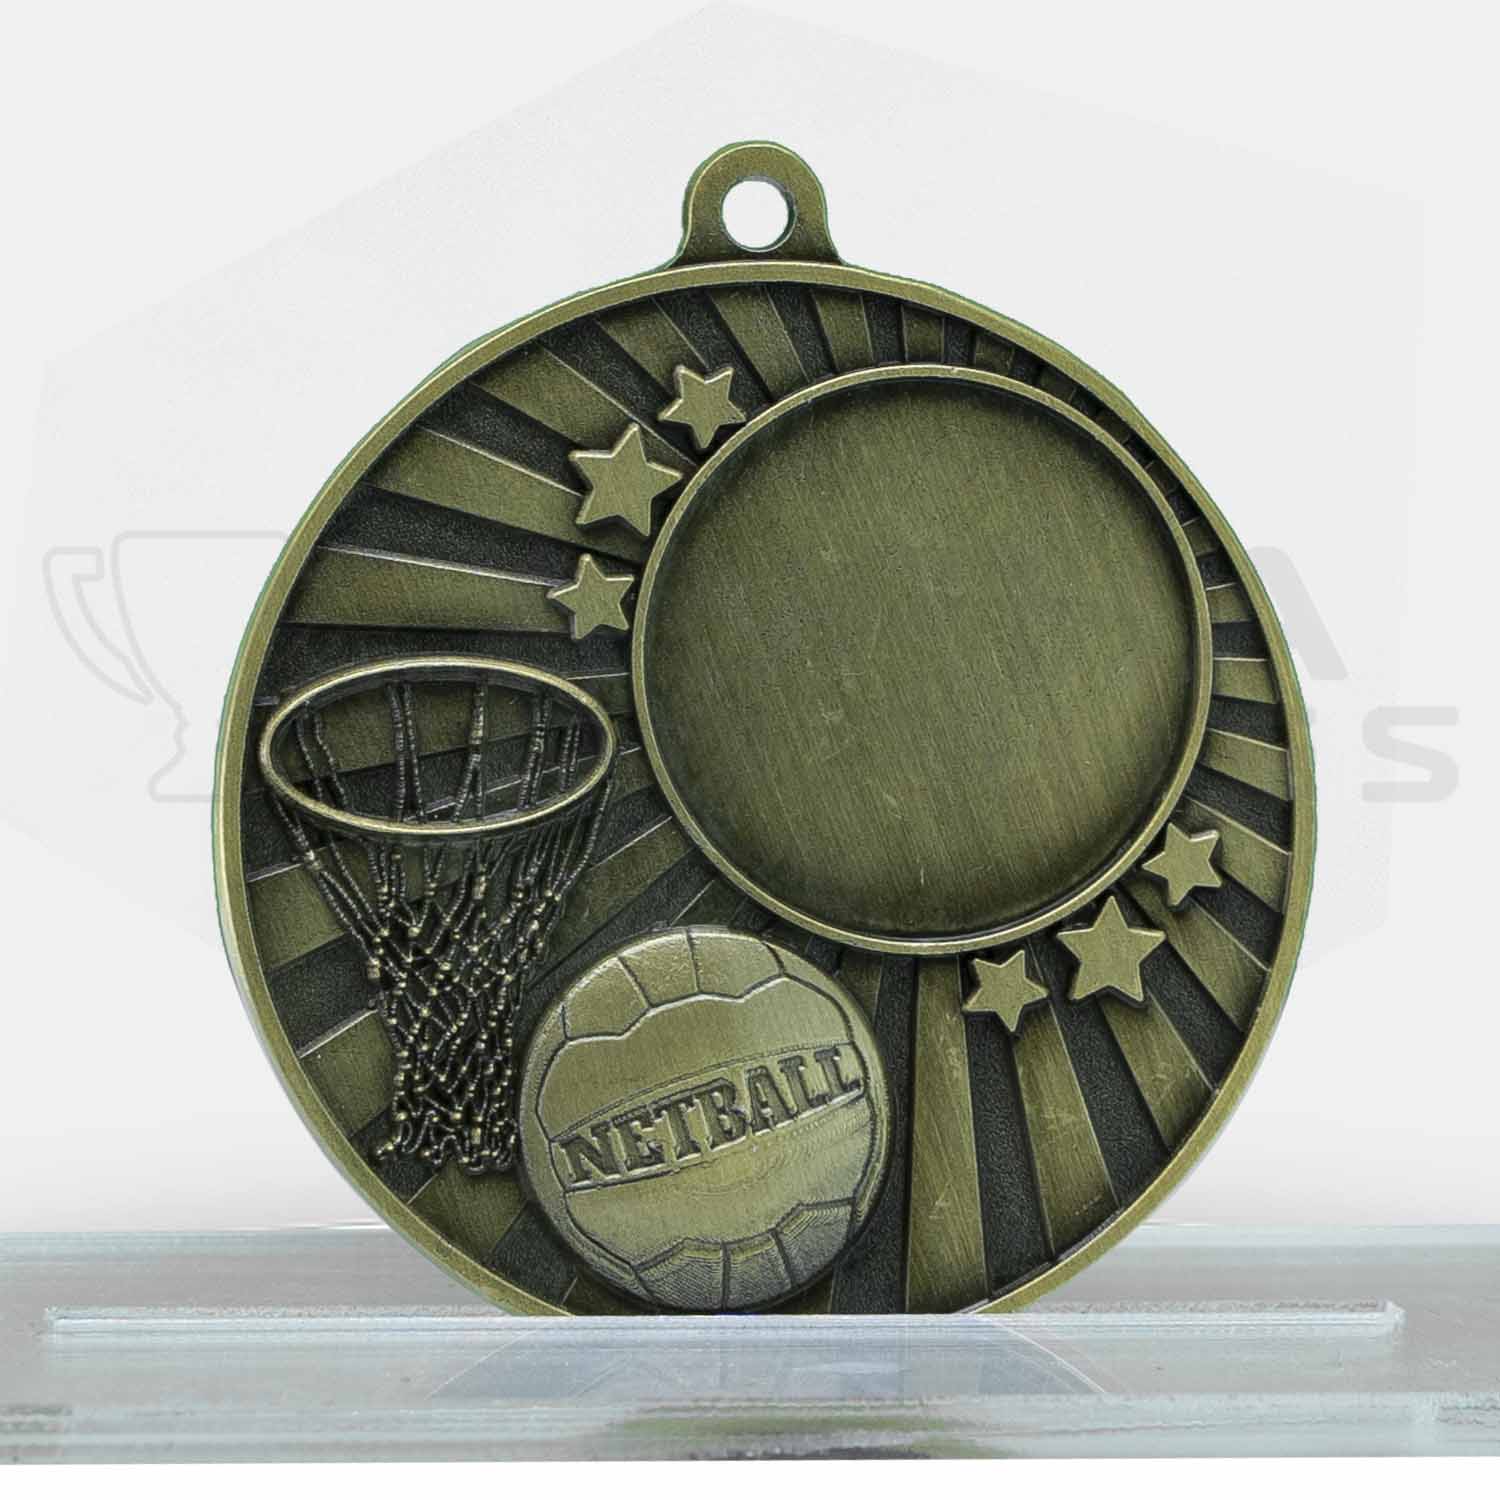 impact-medal-netball-gold-mz611g-front